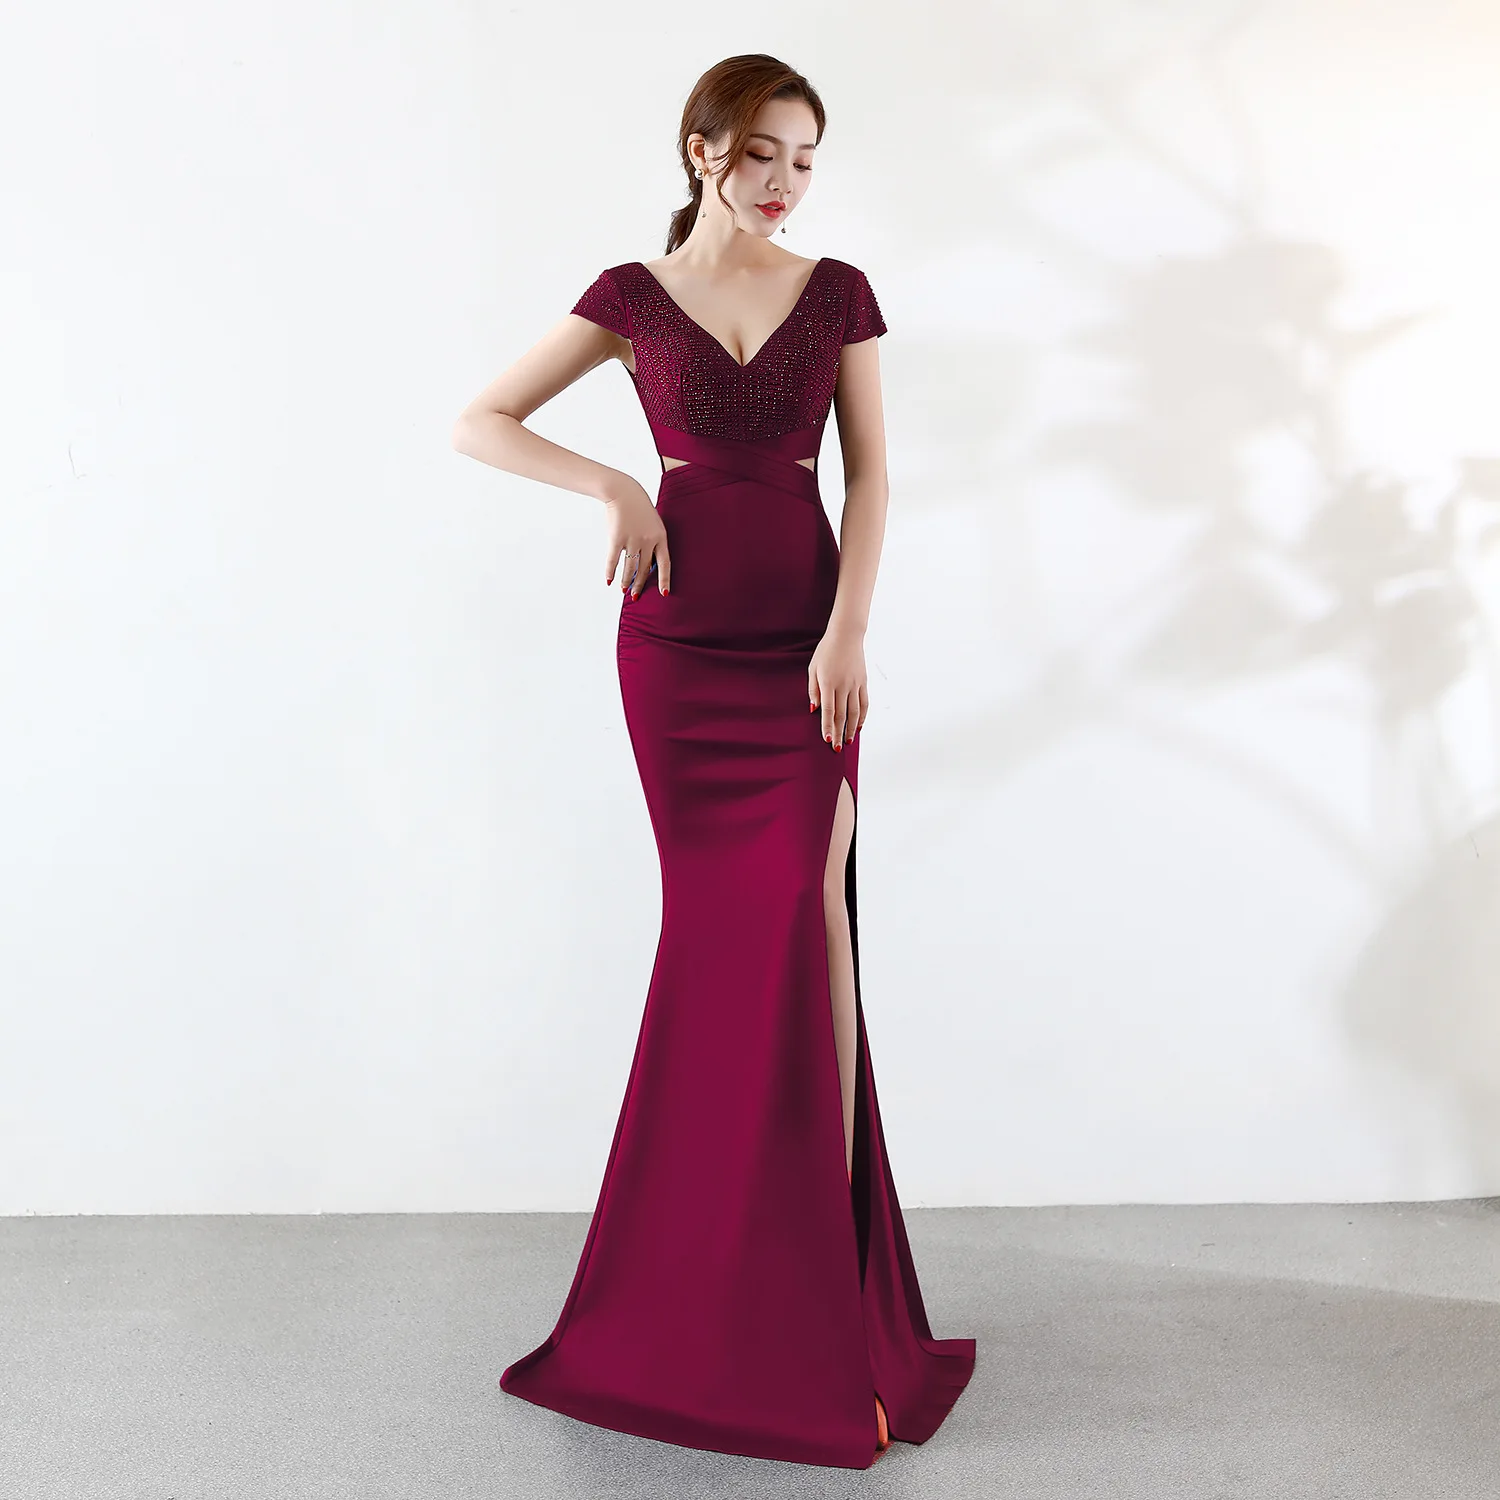 

New Slim Temperament Dress Female Dignified Atmosphere Long Hollow Fishtail Celebrity Host Dress European And American Style